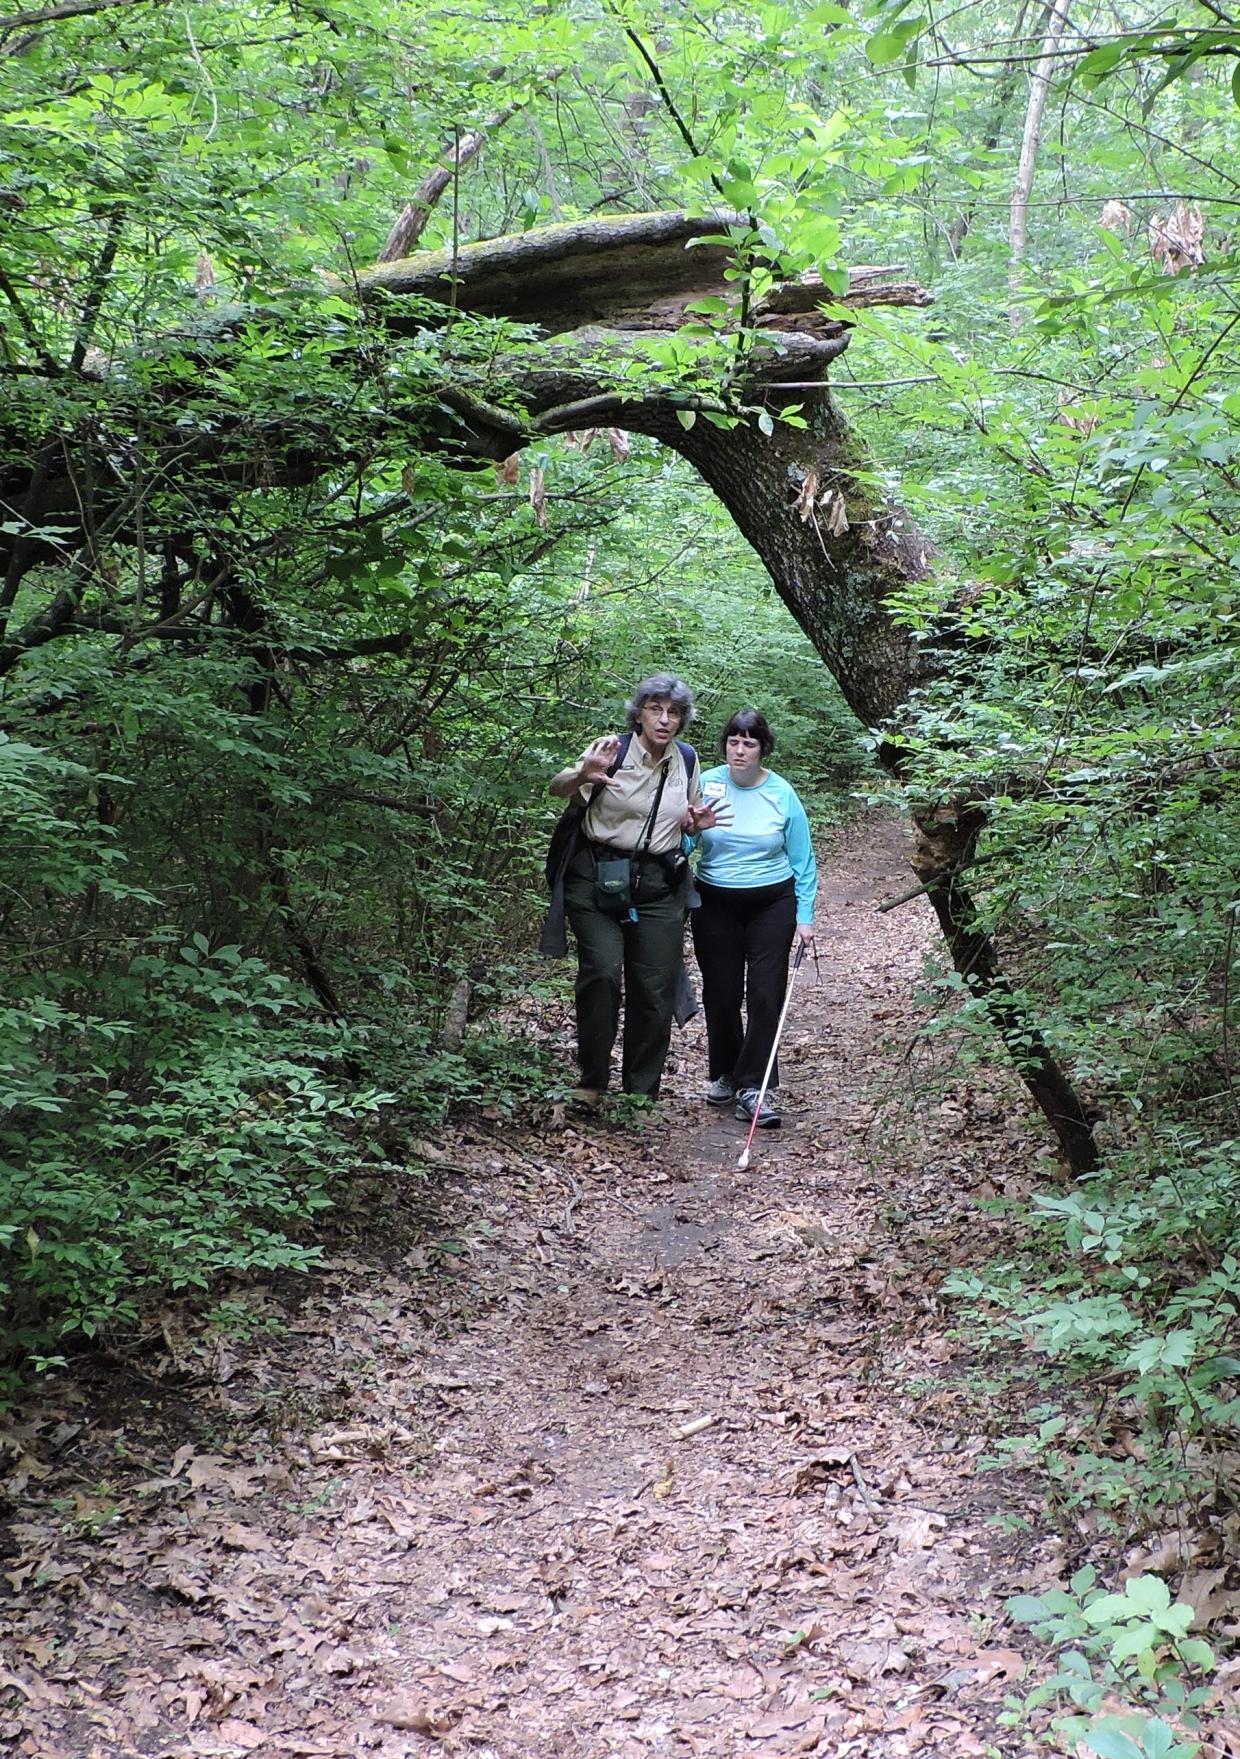 A DCR staff person walks next to a hiker using a white cane, with their arm held out to guide the hiker.